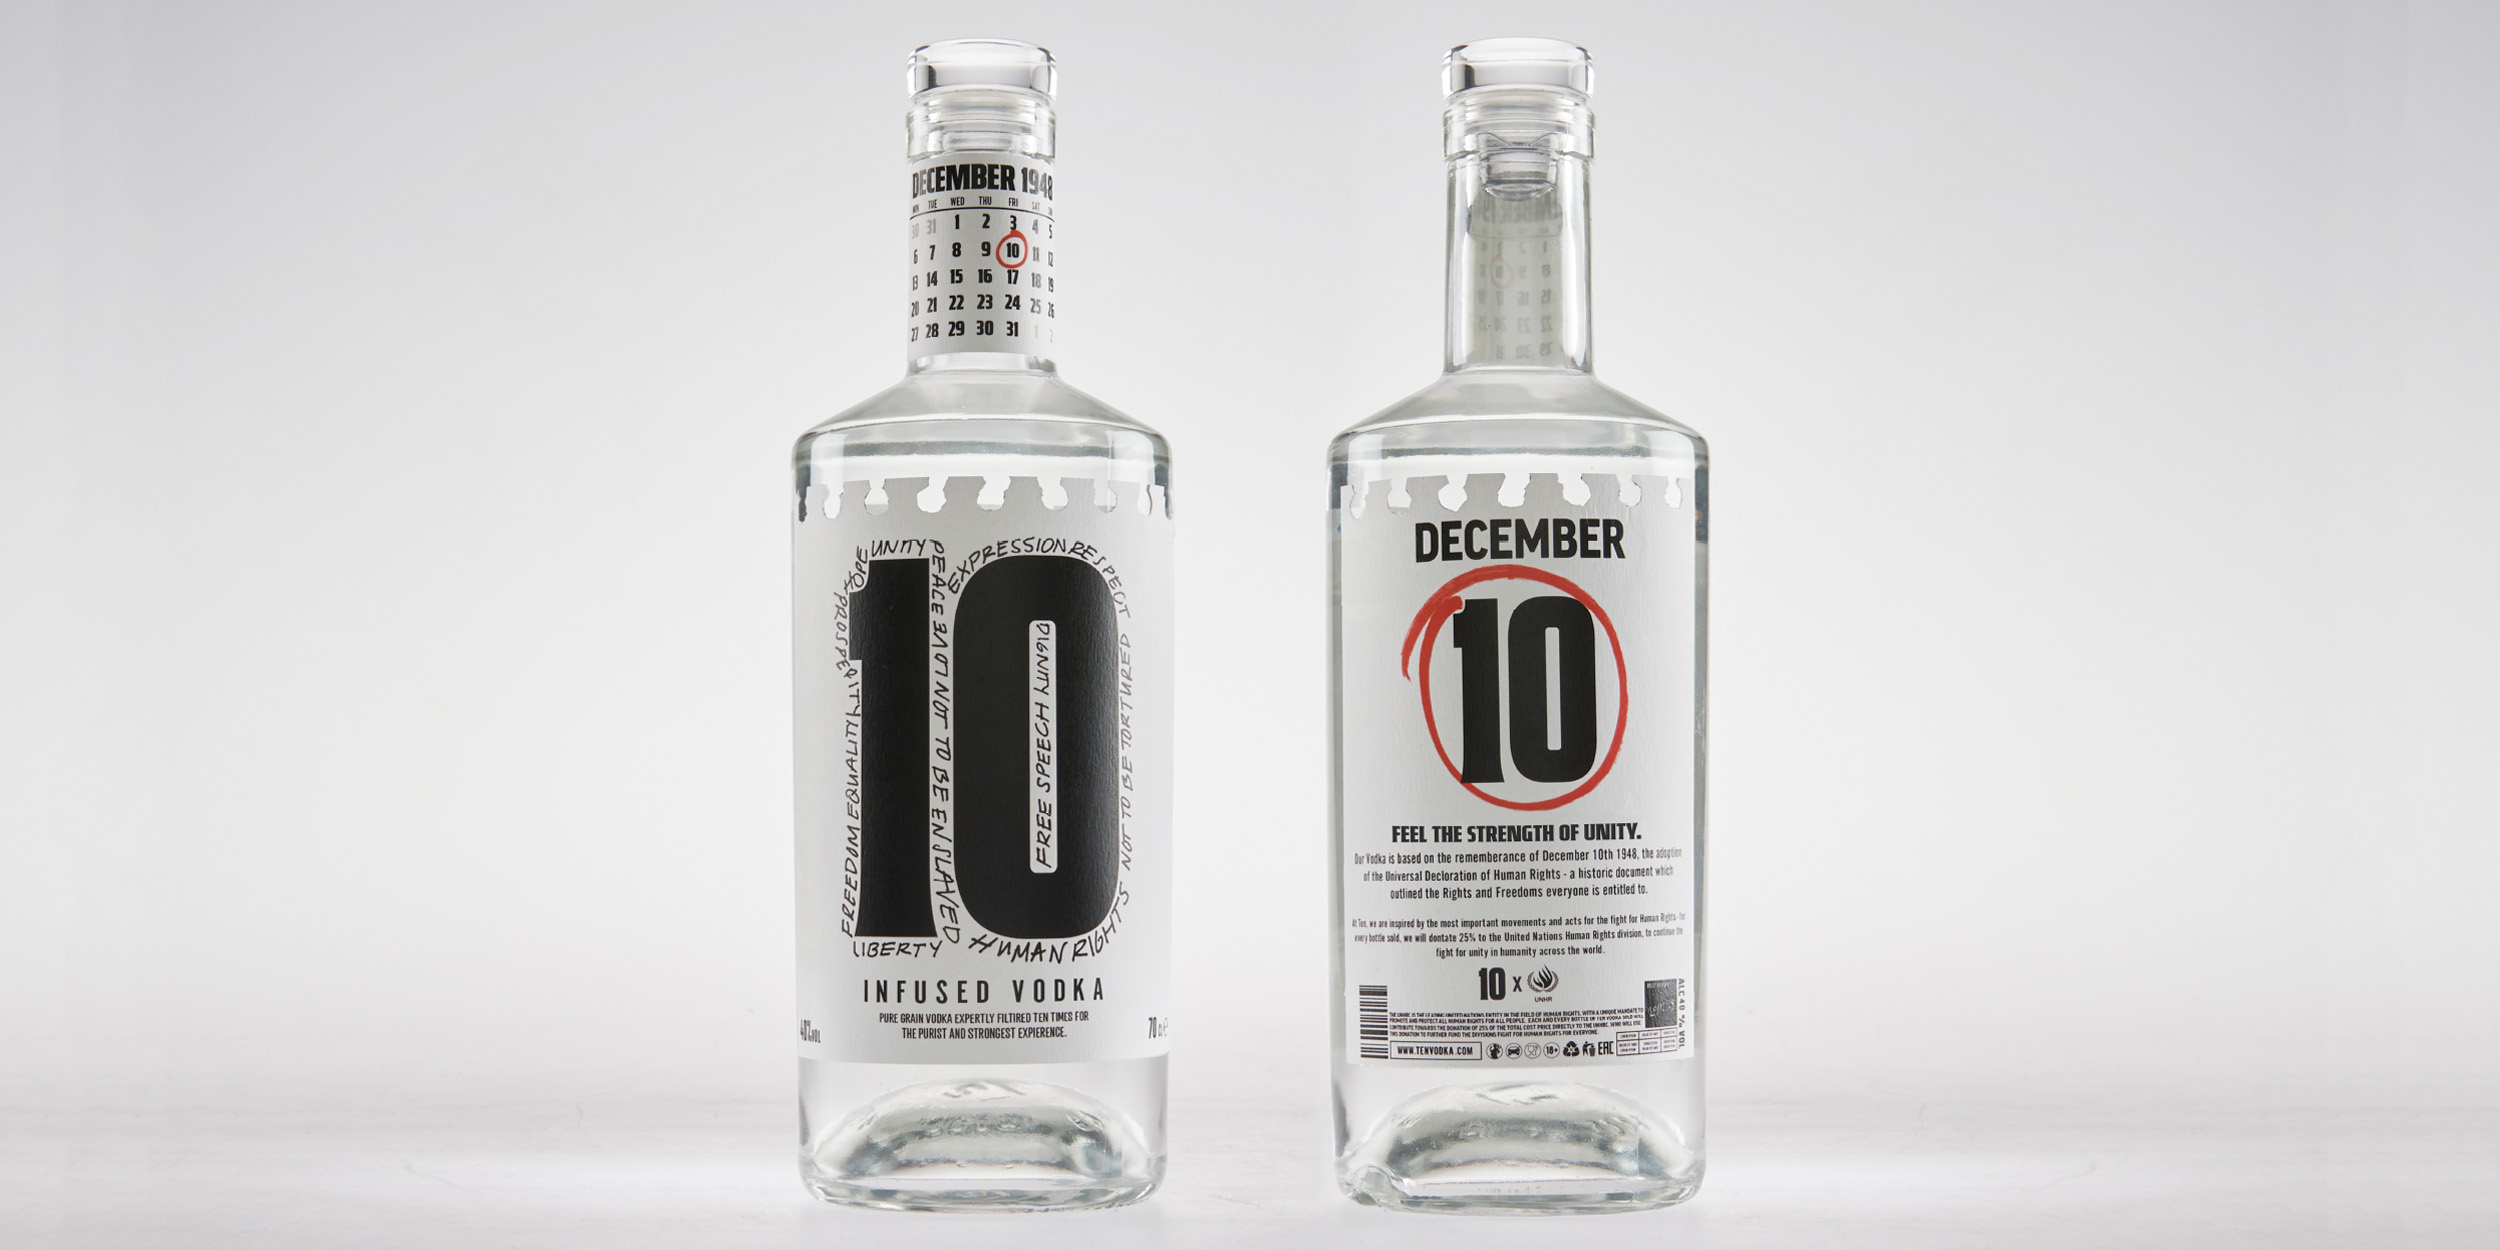 Design work by Cian Paige, showcasing the front and back sides of the 10 Vodka packaging.